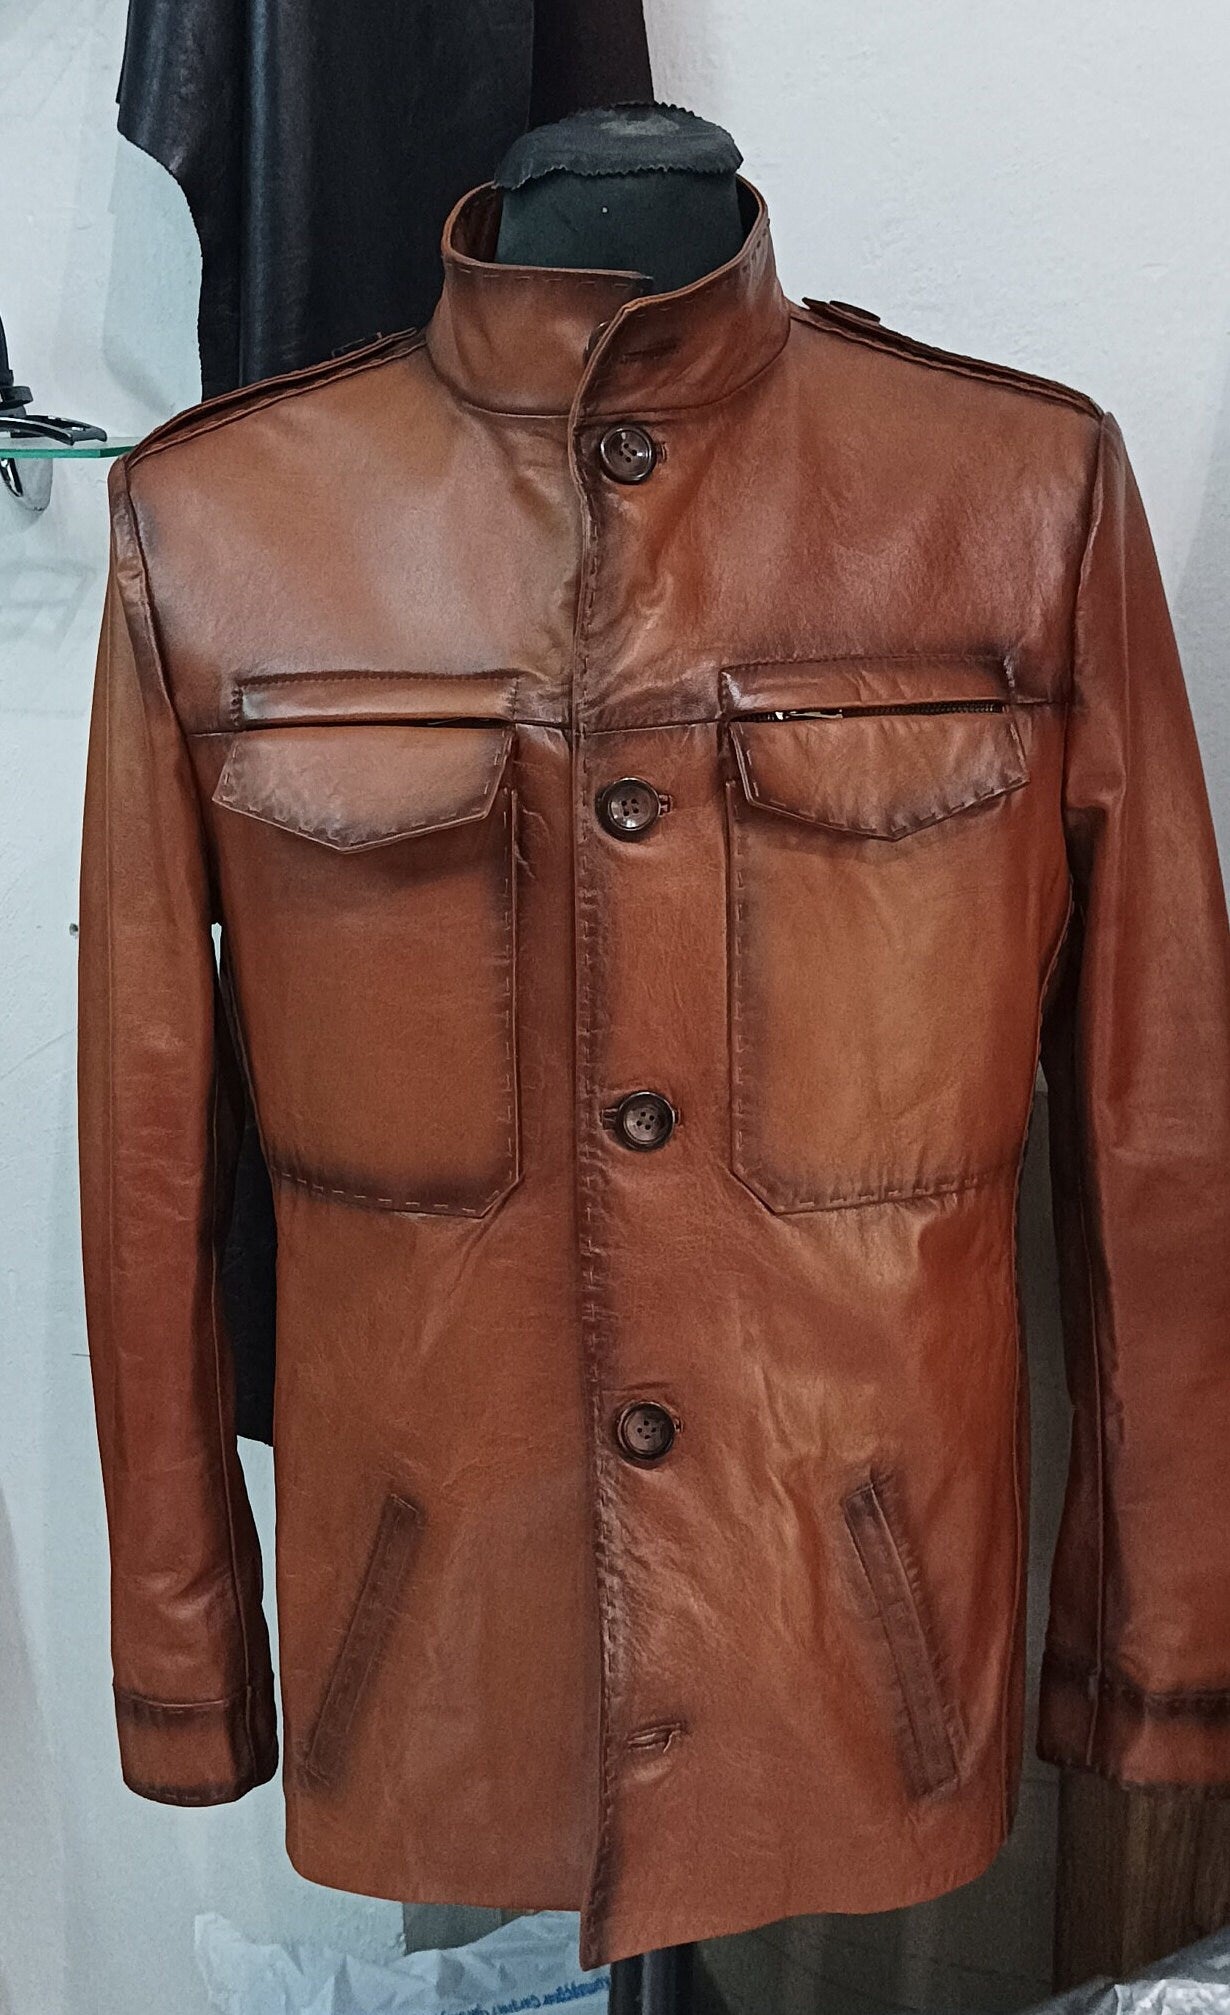 Bespoke | Brown | Leather Jacket  | Handmade Jacket  | Tailored to Your Size | Made an order  99percenthandmade   